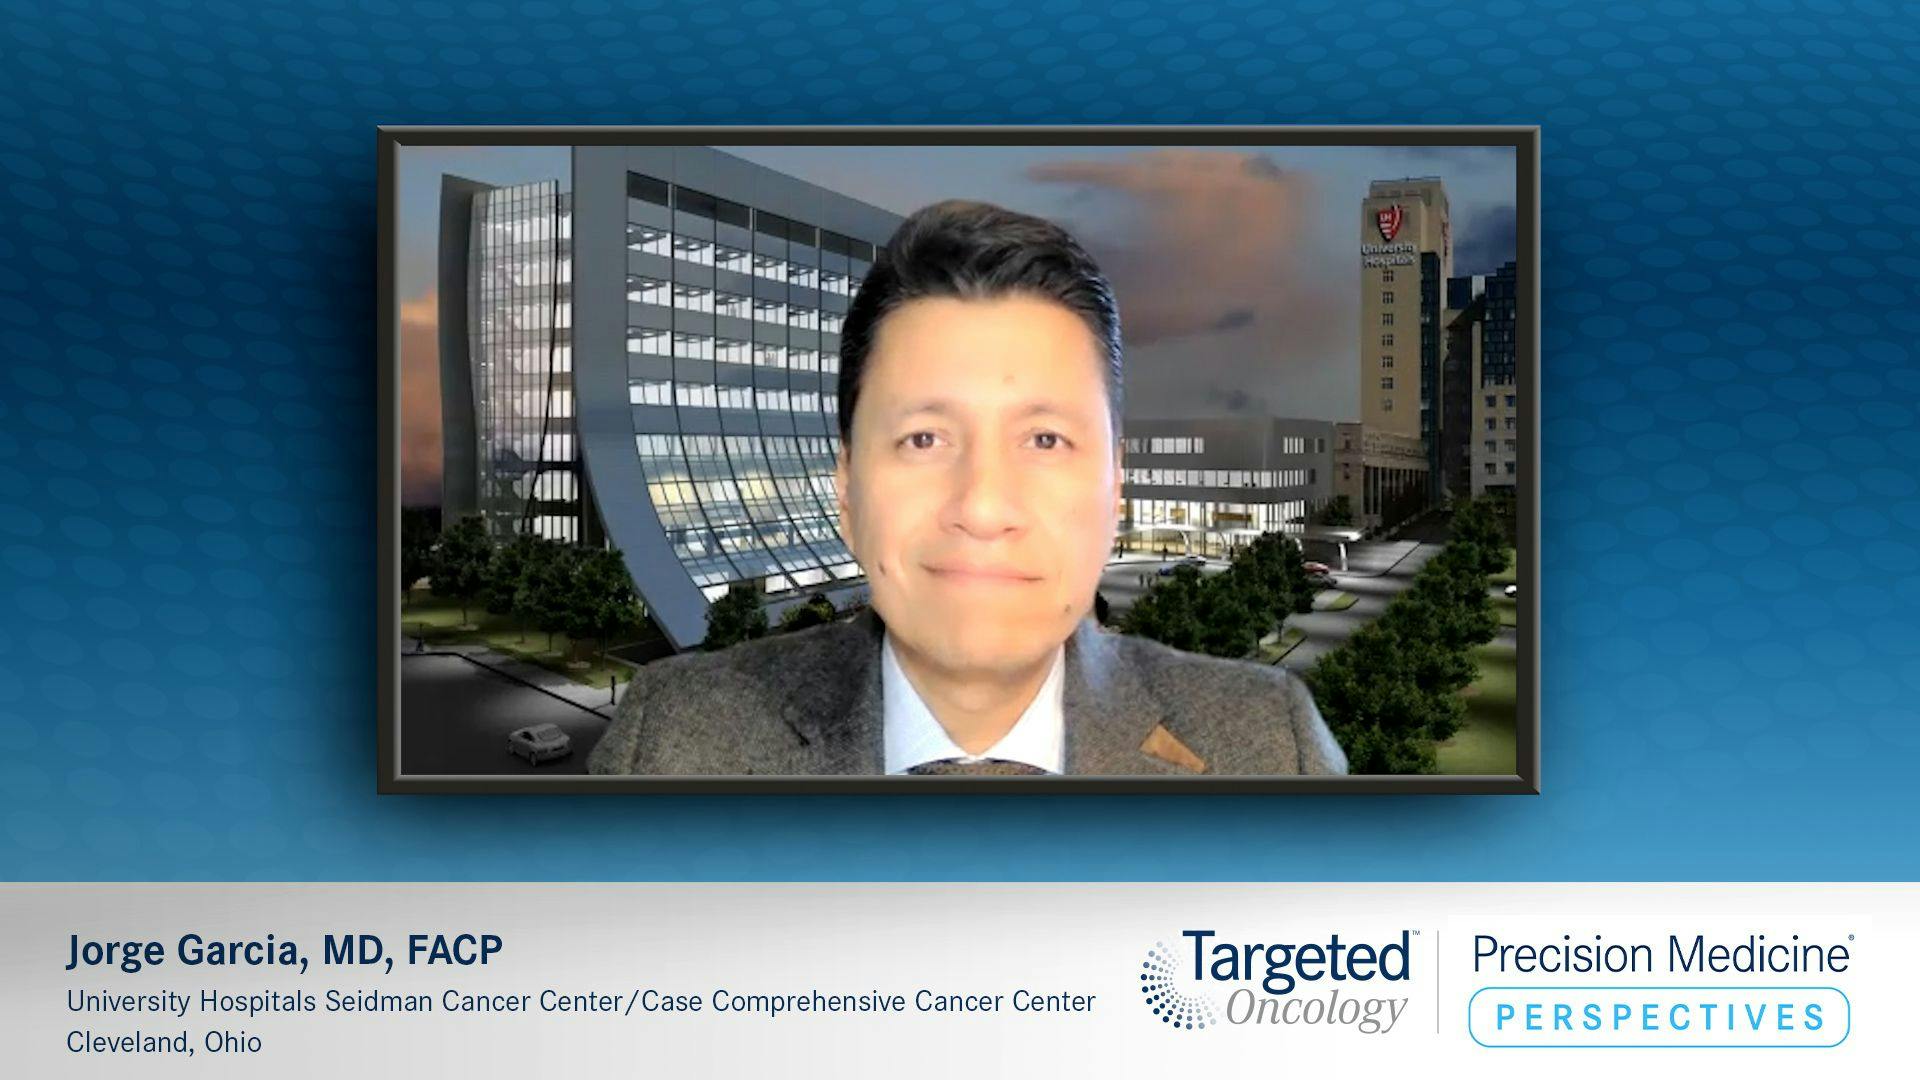 EP. 4A: New Lutetium PSMA, Metastatic Castration-Resistant Prostate Cancer (mCRPC), and the VISION Trial